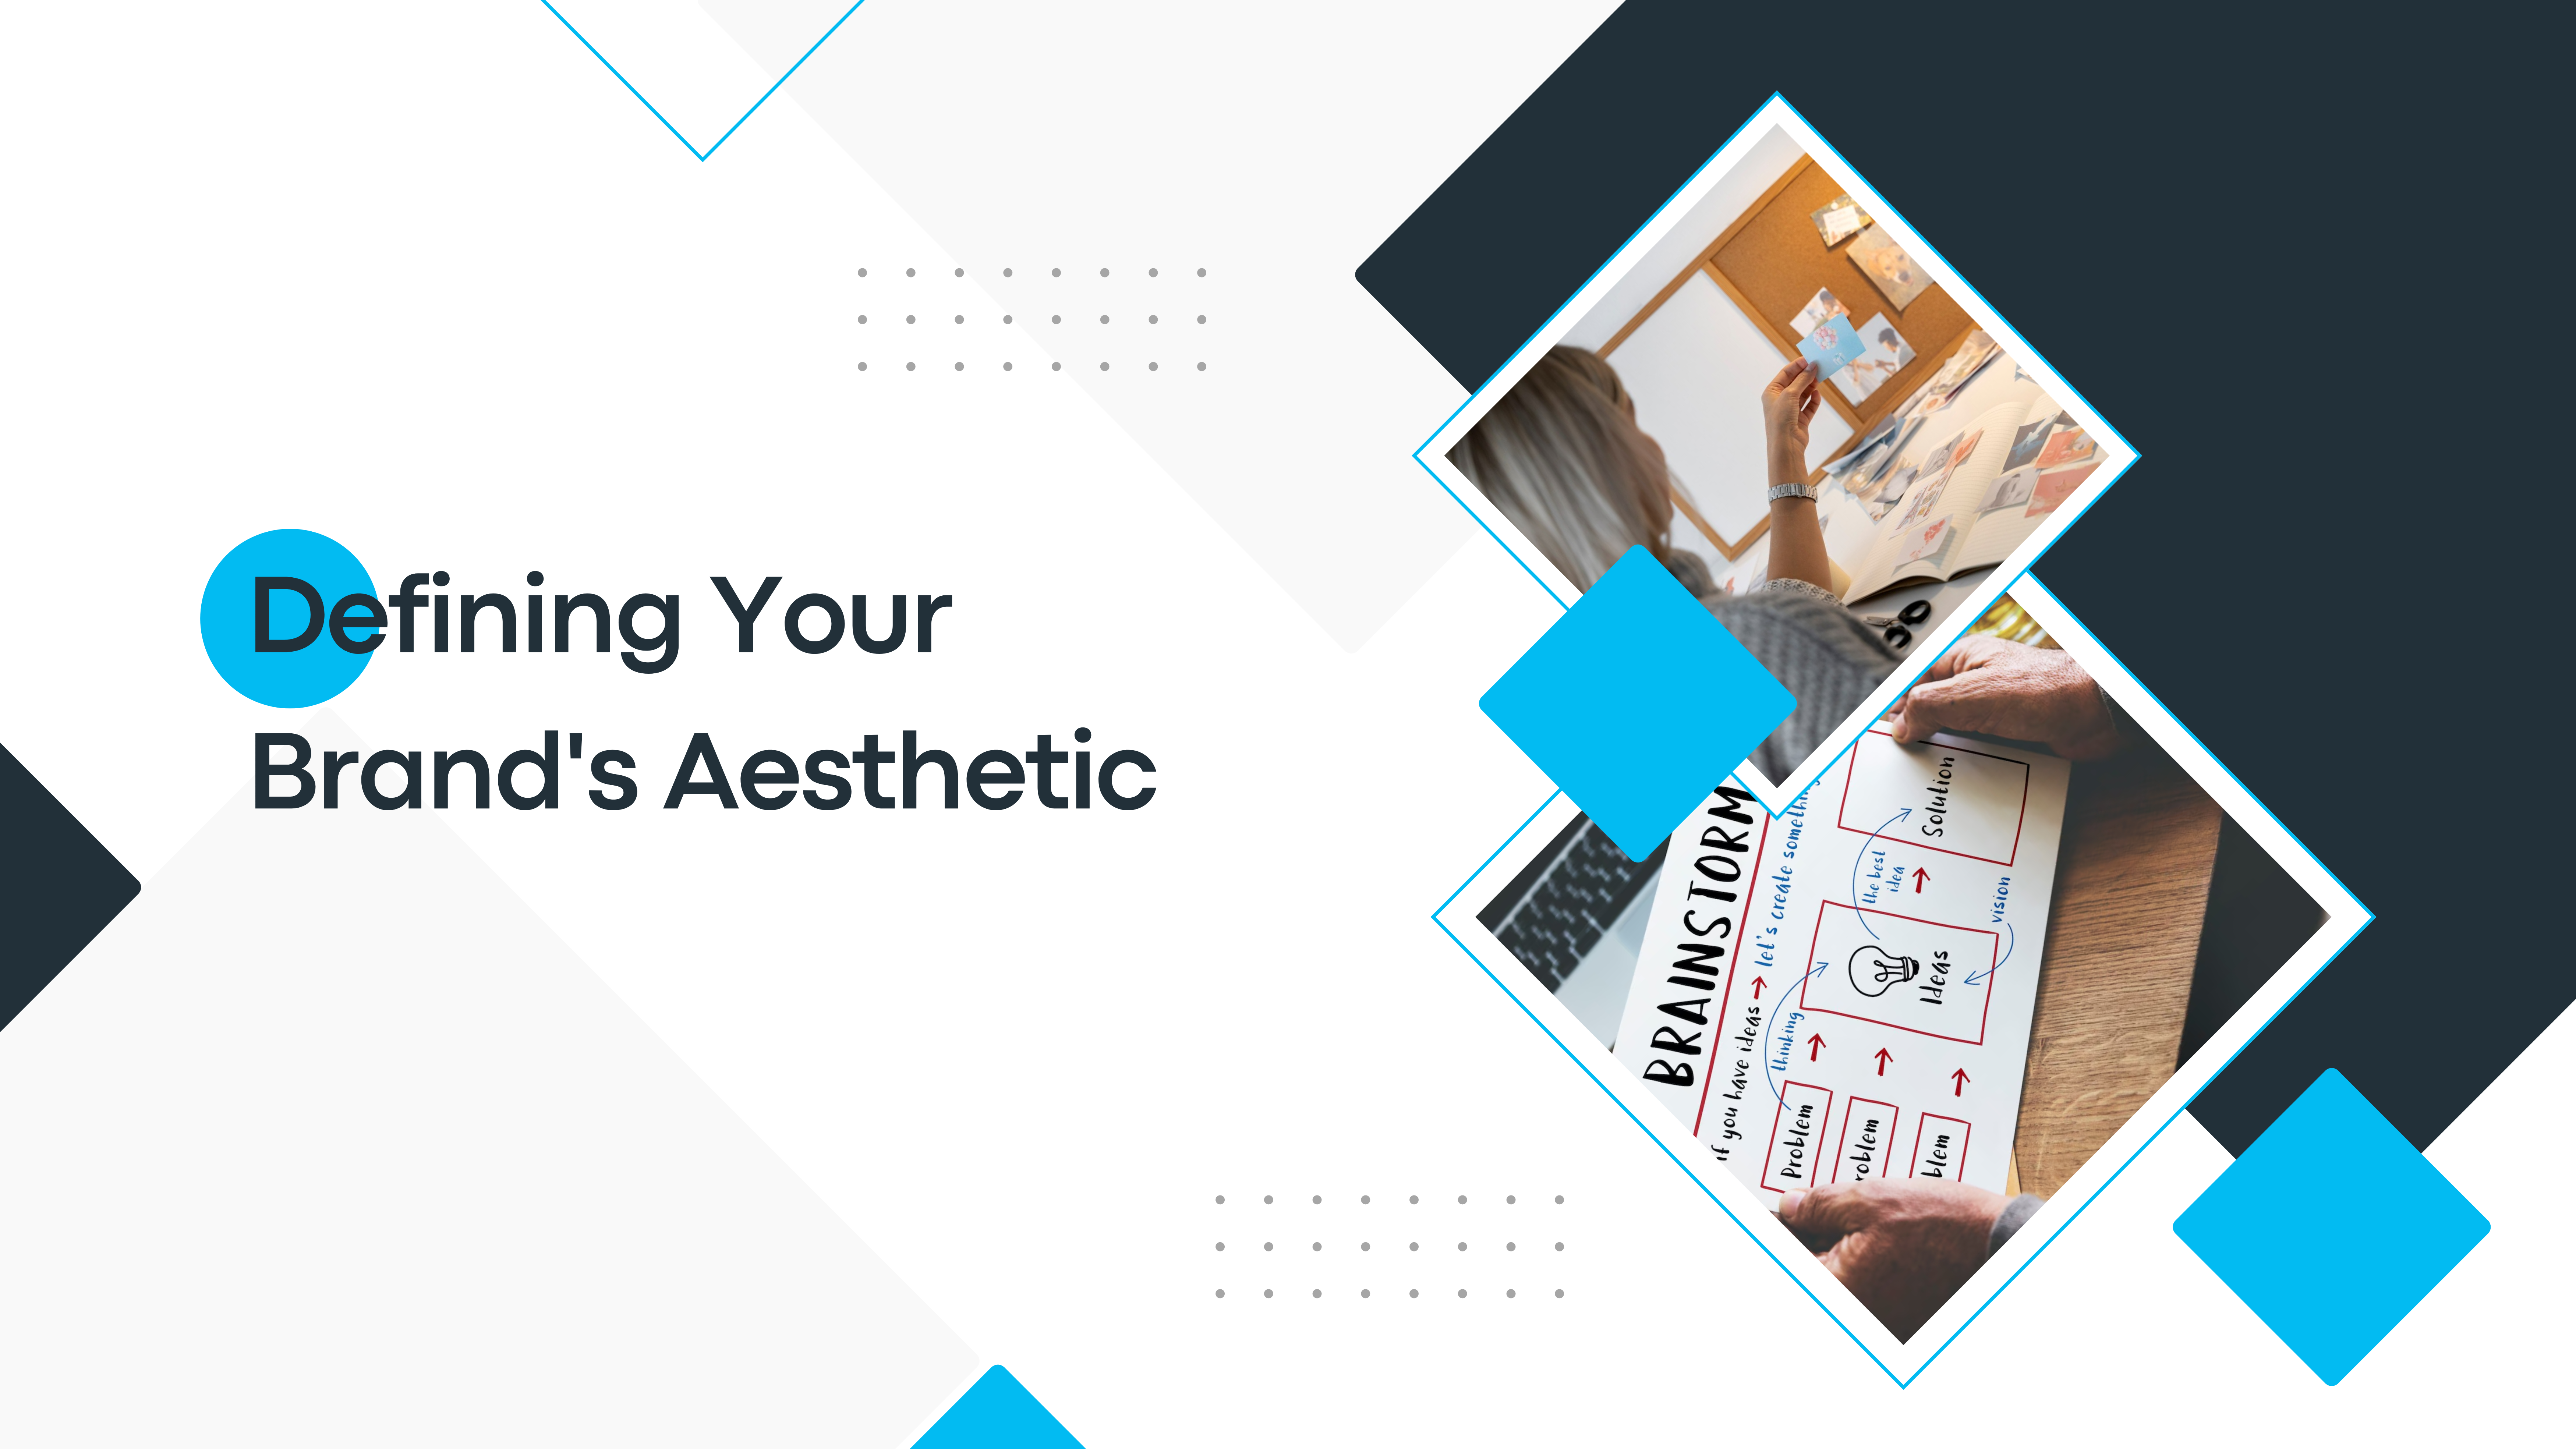 Defining Your Brand’s Aesthetic